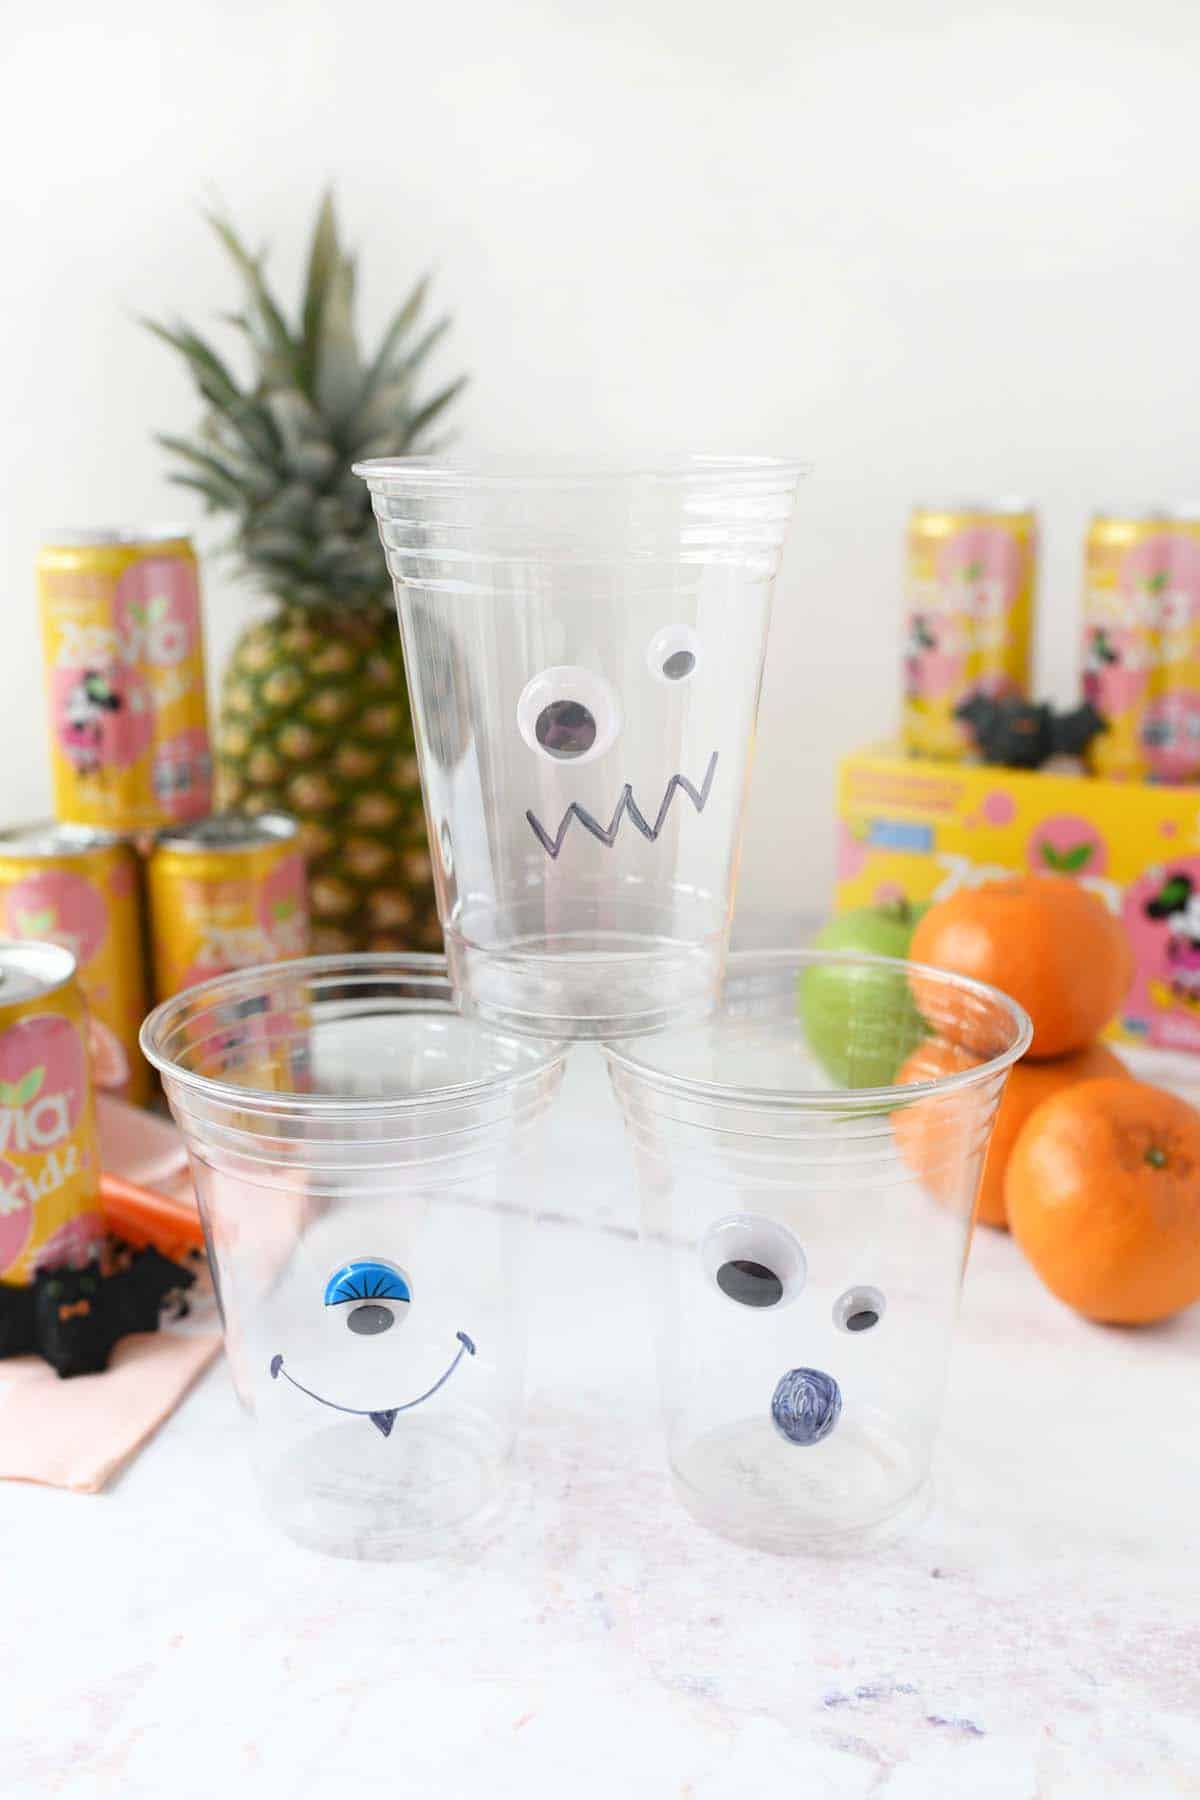 Silly monster faces with googly eyes on plastic cups.